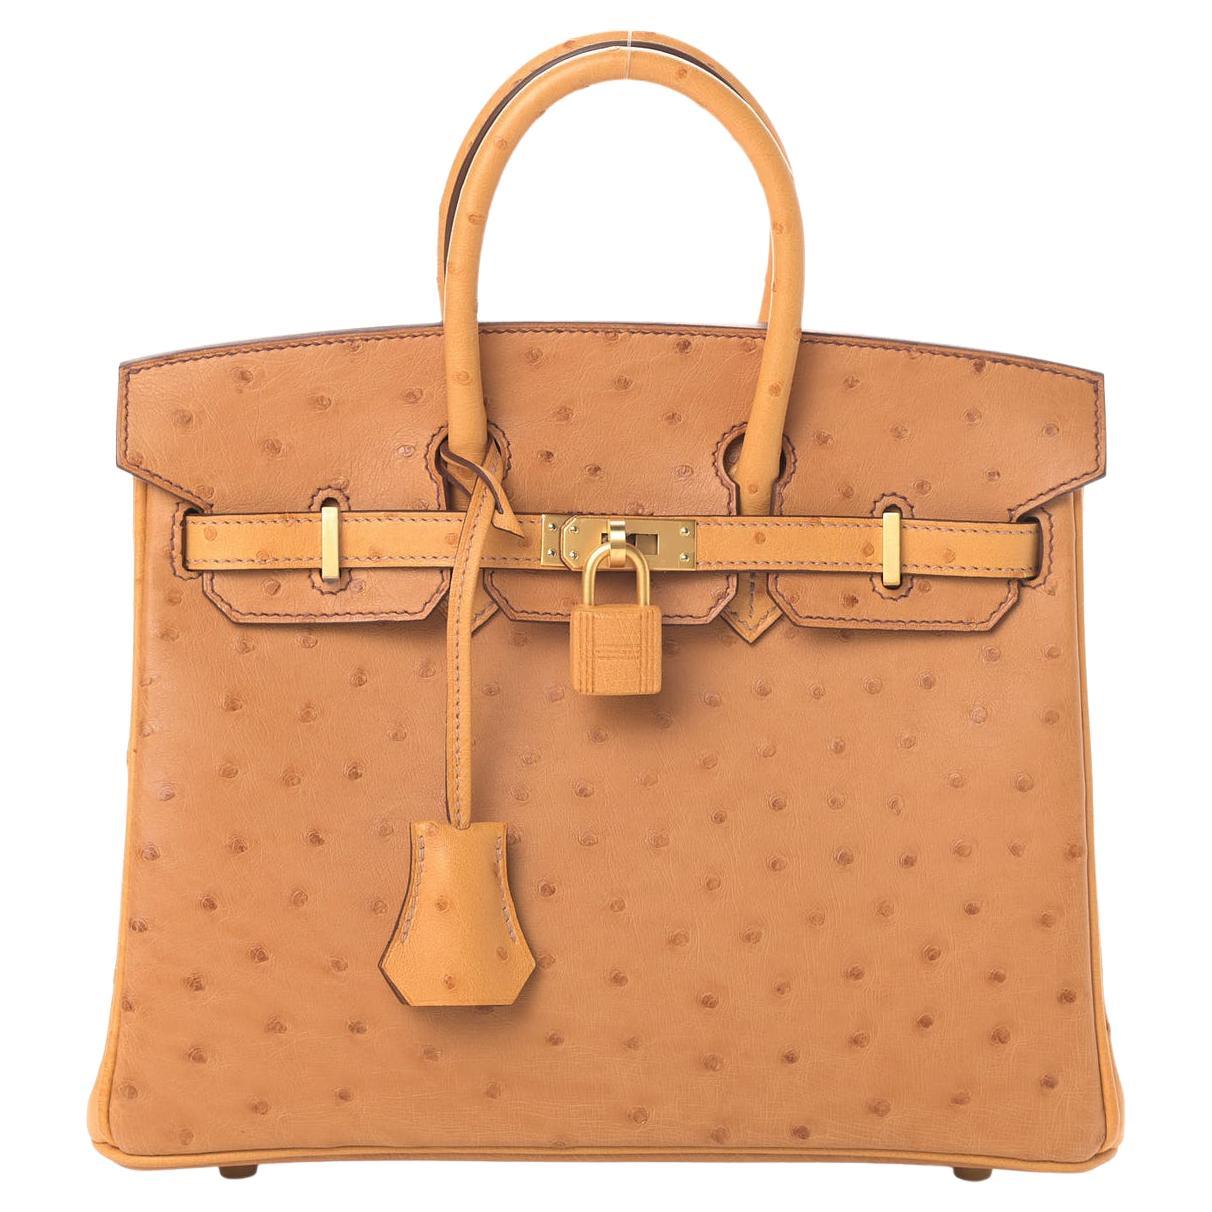 HERMES NEW Birkin 25 Mustard Ostrich Exotic Gold Tote Bag - Special Order